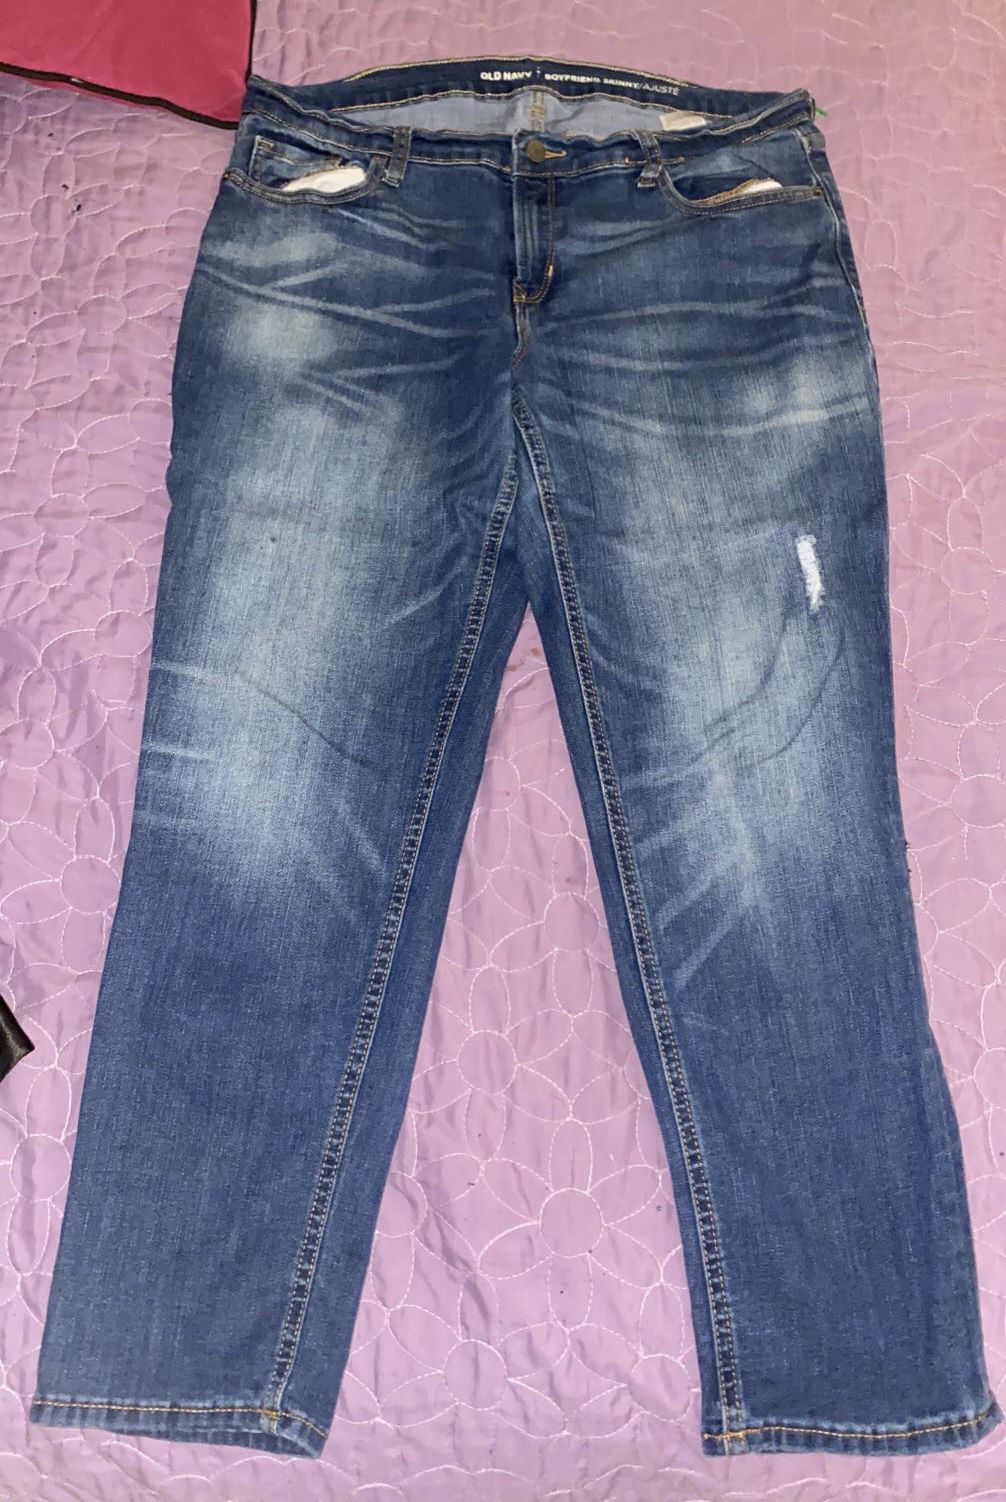 Women Jeans for Sale in Orosi, CA - OfferUp